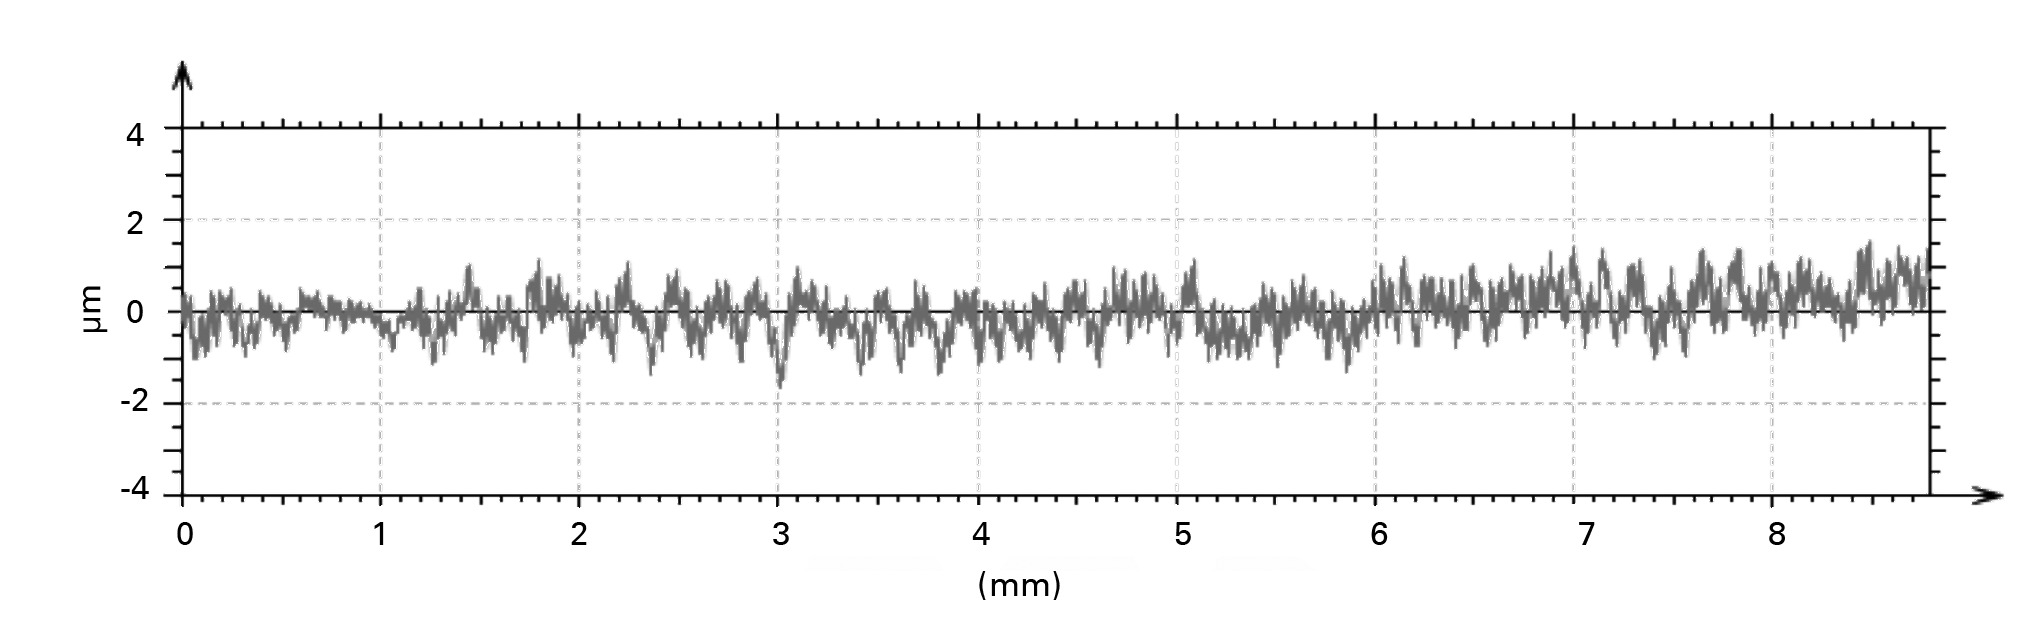 Figs. 6a - 6b 
            Example of a typical scan trace
taken using the diamond probe on the roundness measuring machine from
(a) the OptiStem trunnion and (b) the Exeter trunnion.
          